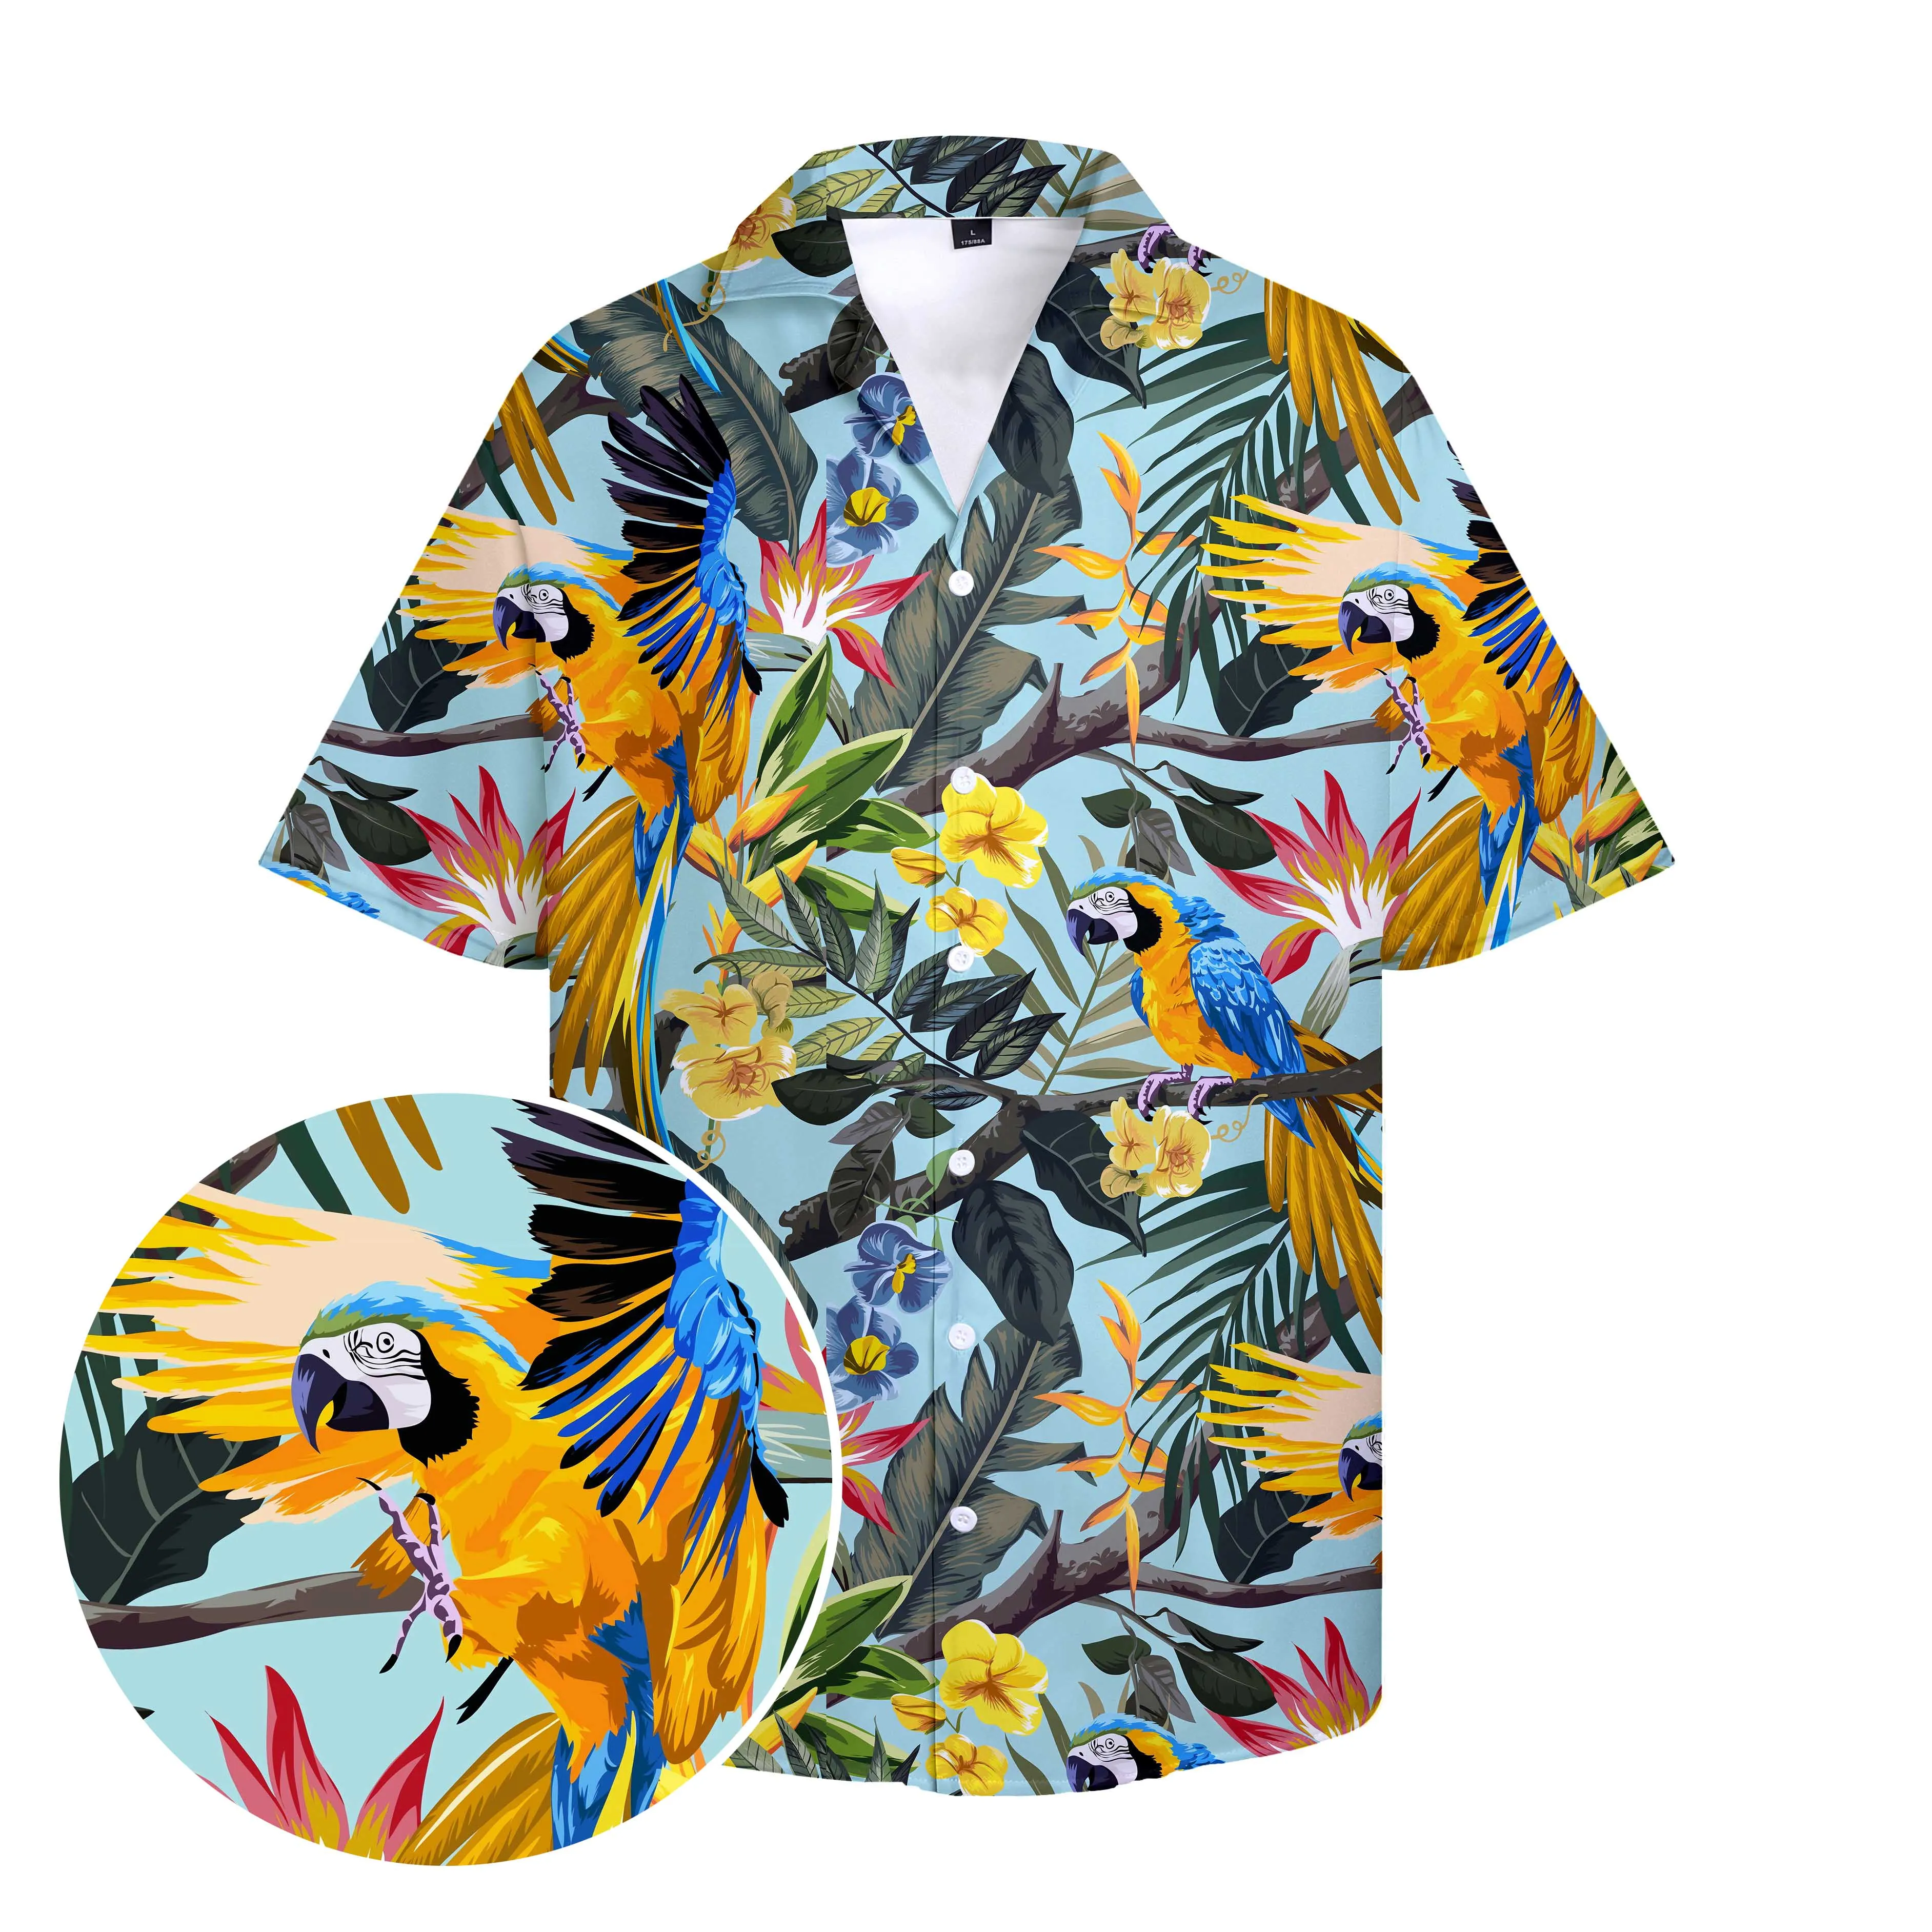 New Men's Shirts Hawaiian Island Style Parrot Casual Tops Flowers Printed Clothing y2k Button Down Shirts Plus Size